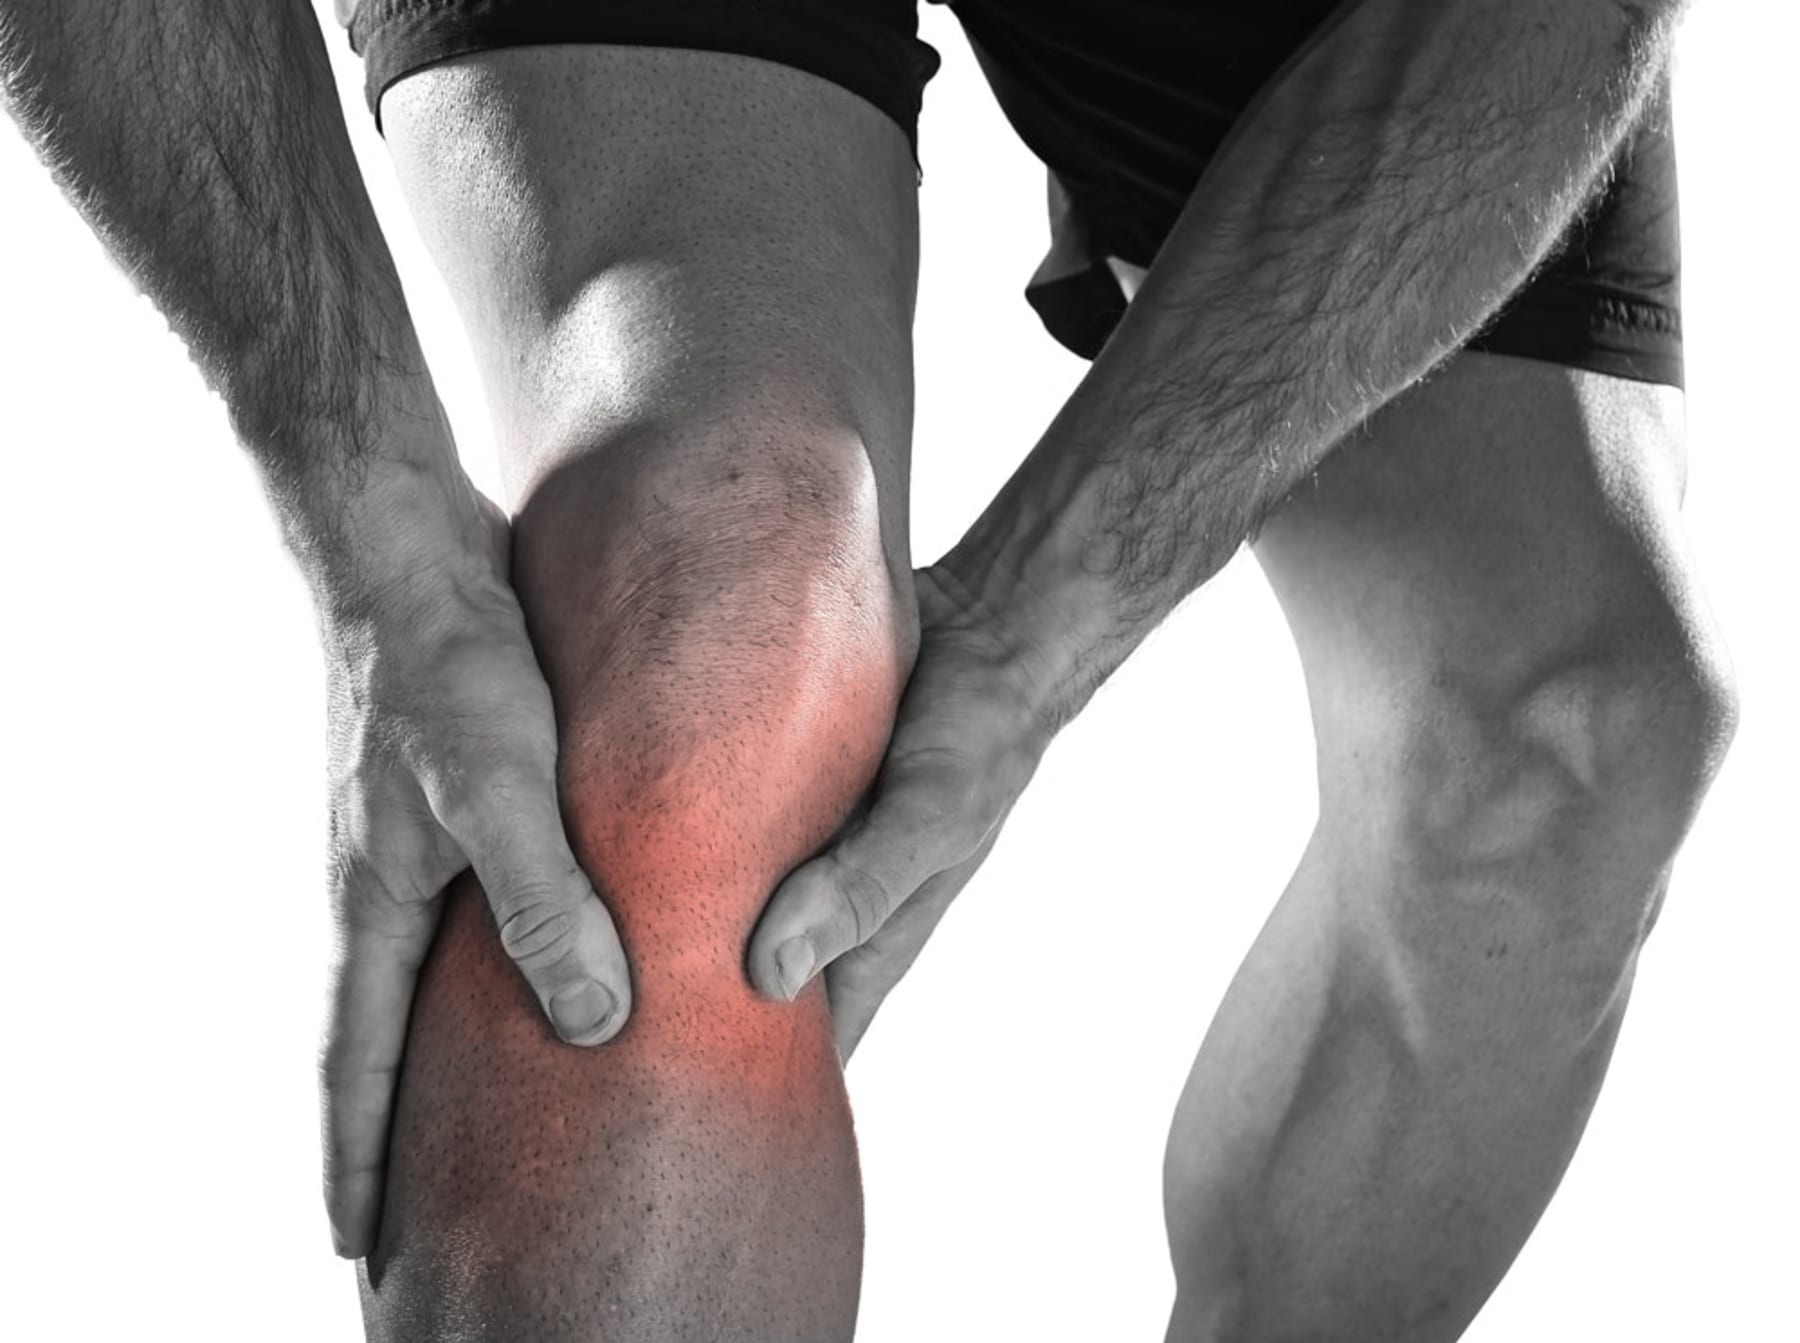 Why should athletes focus on specialized sports medicine treatments rather than other options?